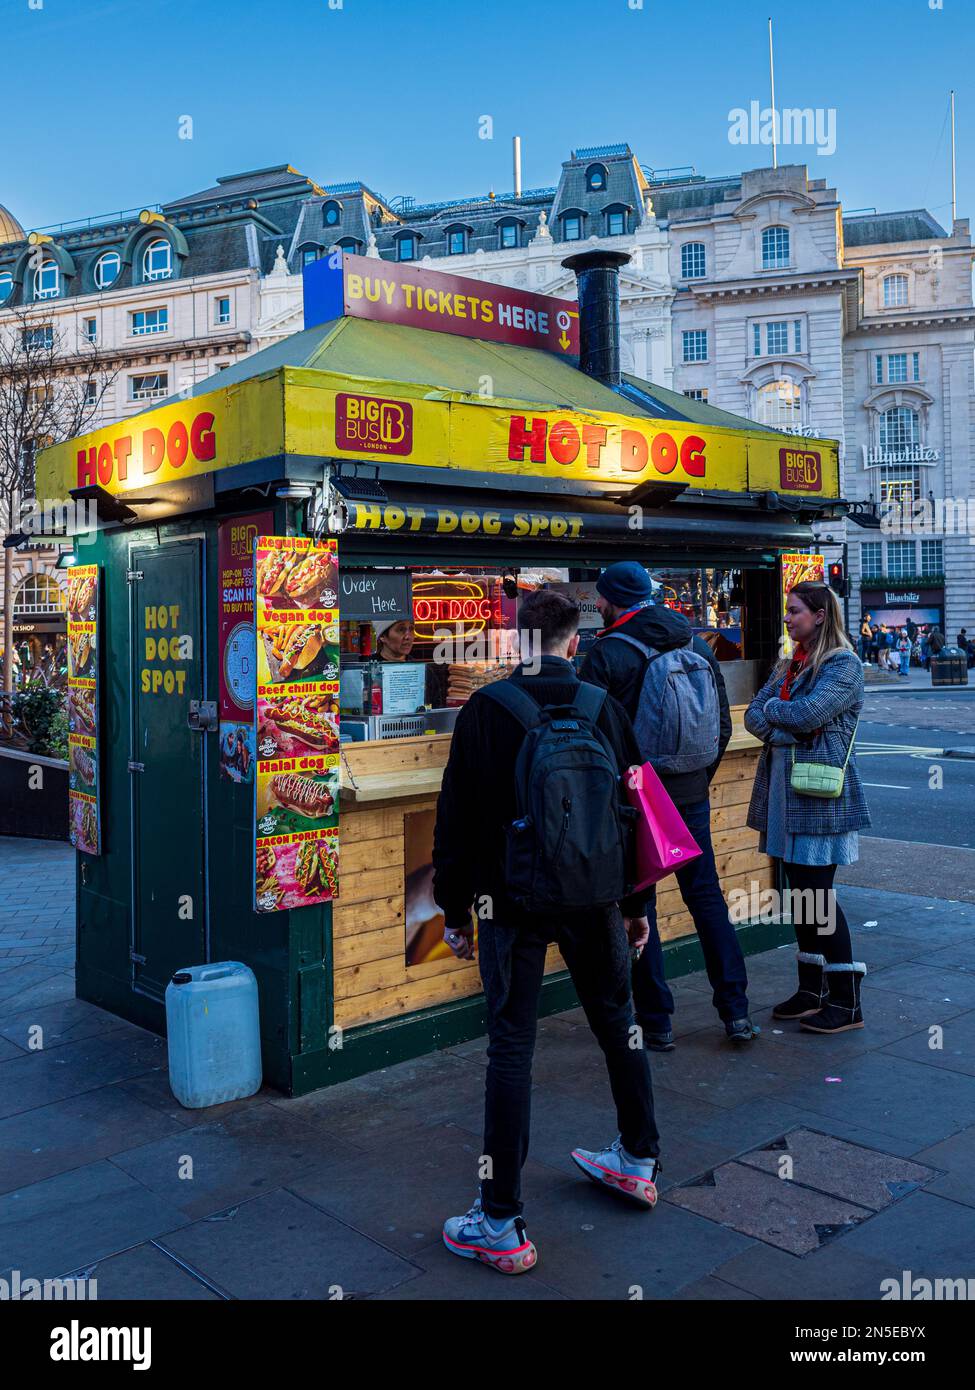 Hot Dog Stall London - Hot Dog Stall am Piccadilly Circus in Central London. London Fast Food. Stockfoto